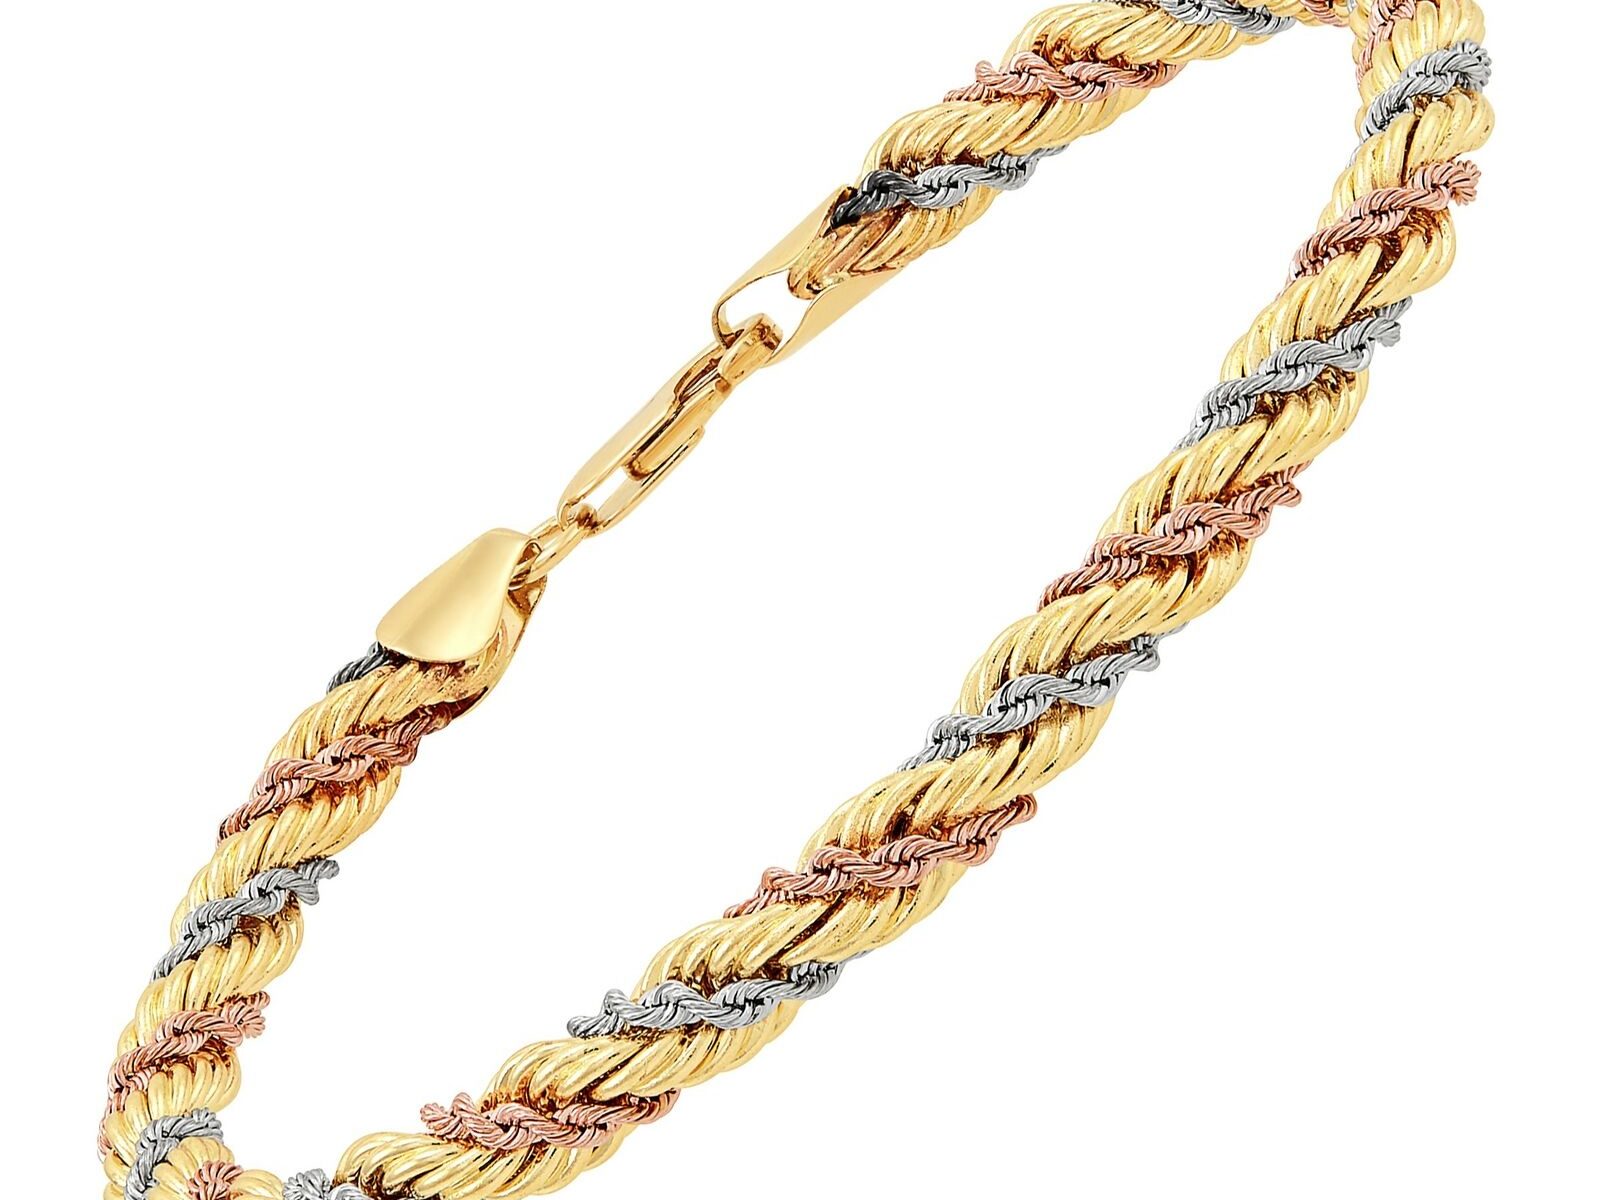 Twisted Rope Chain Bracelet in 14K Three-Tone Gold, 7.5"